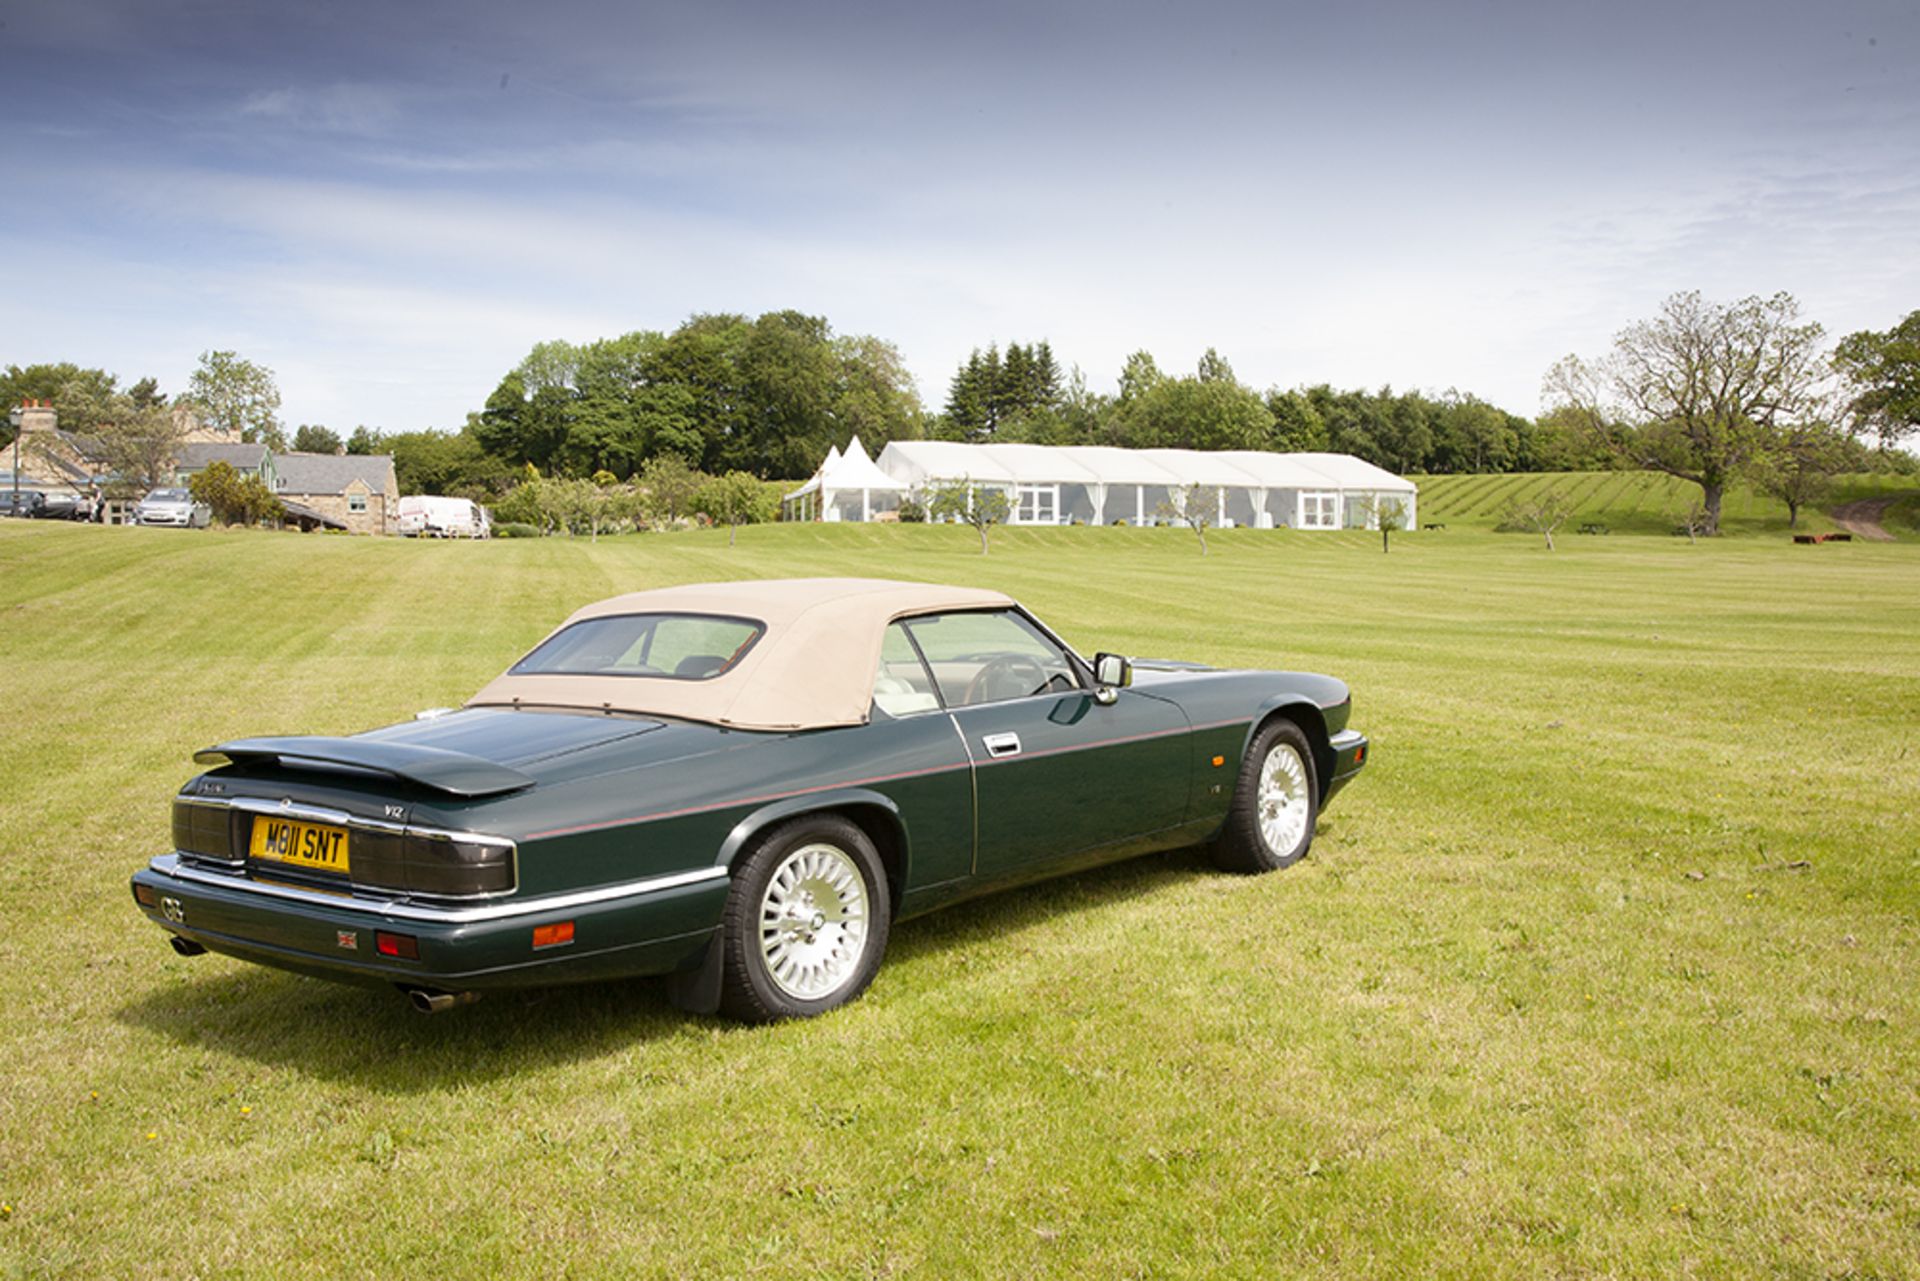 1994 Jaguar XJS V12 Convertible - in fine condition - Image 3 of 13